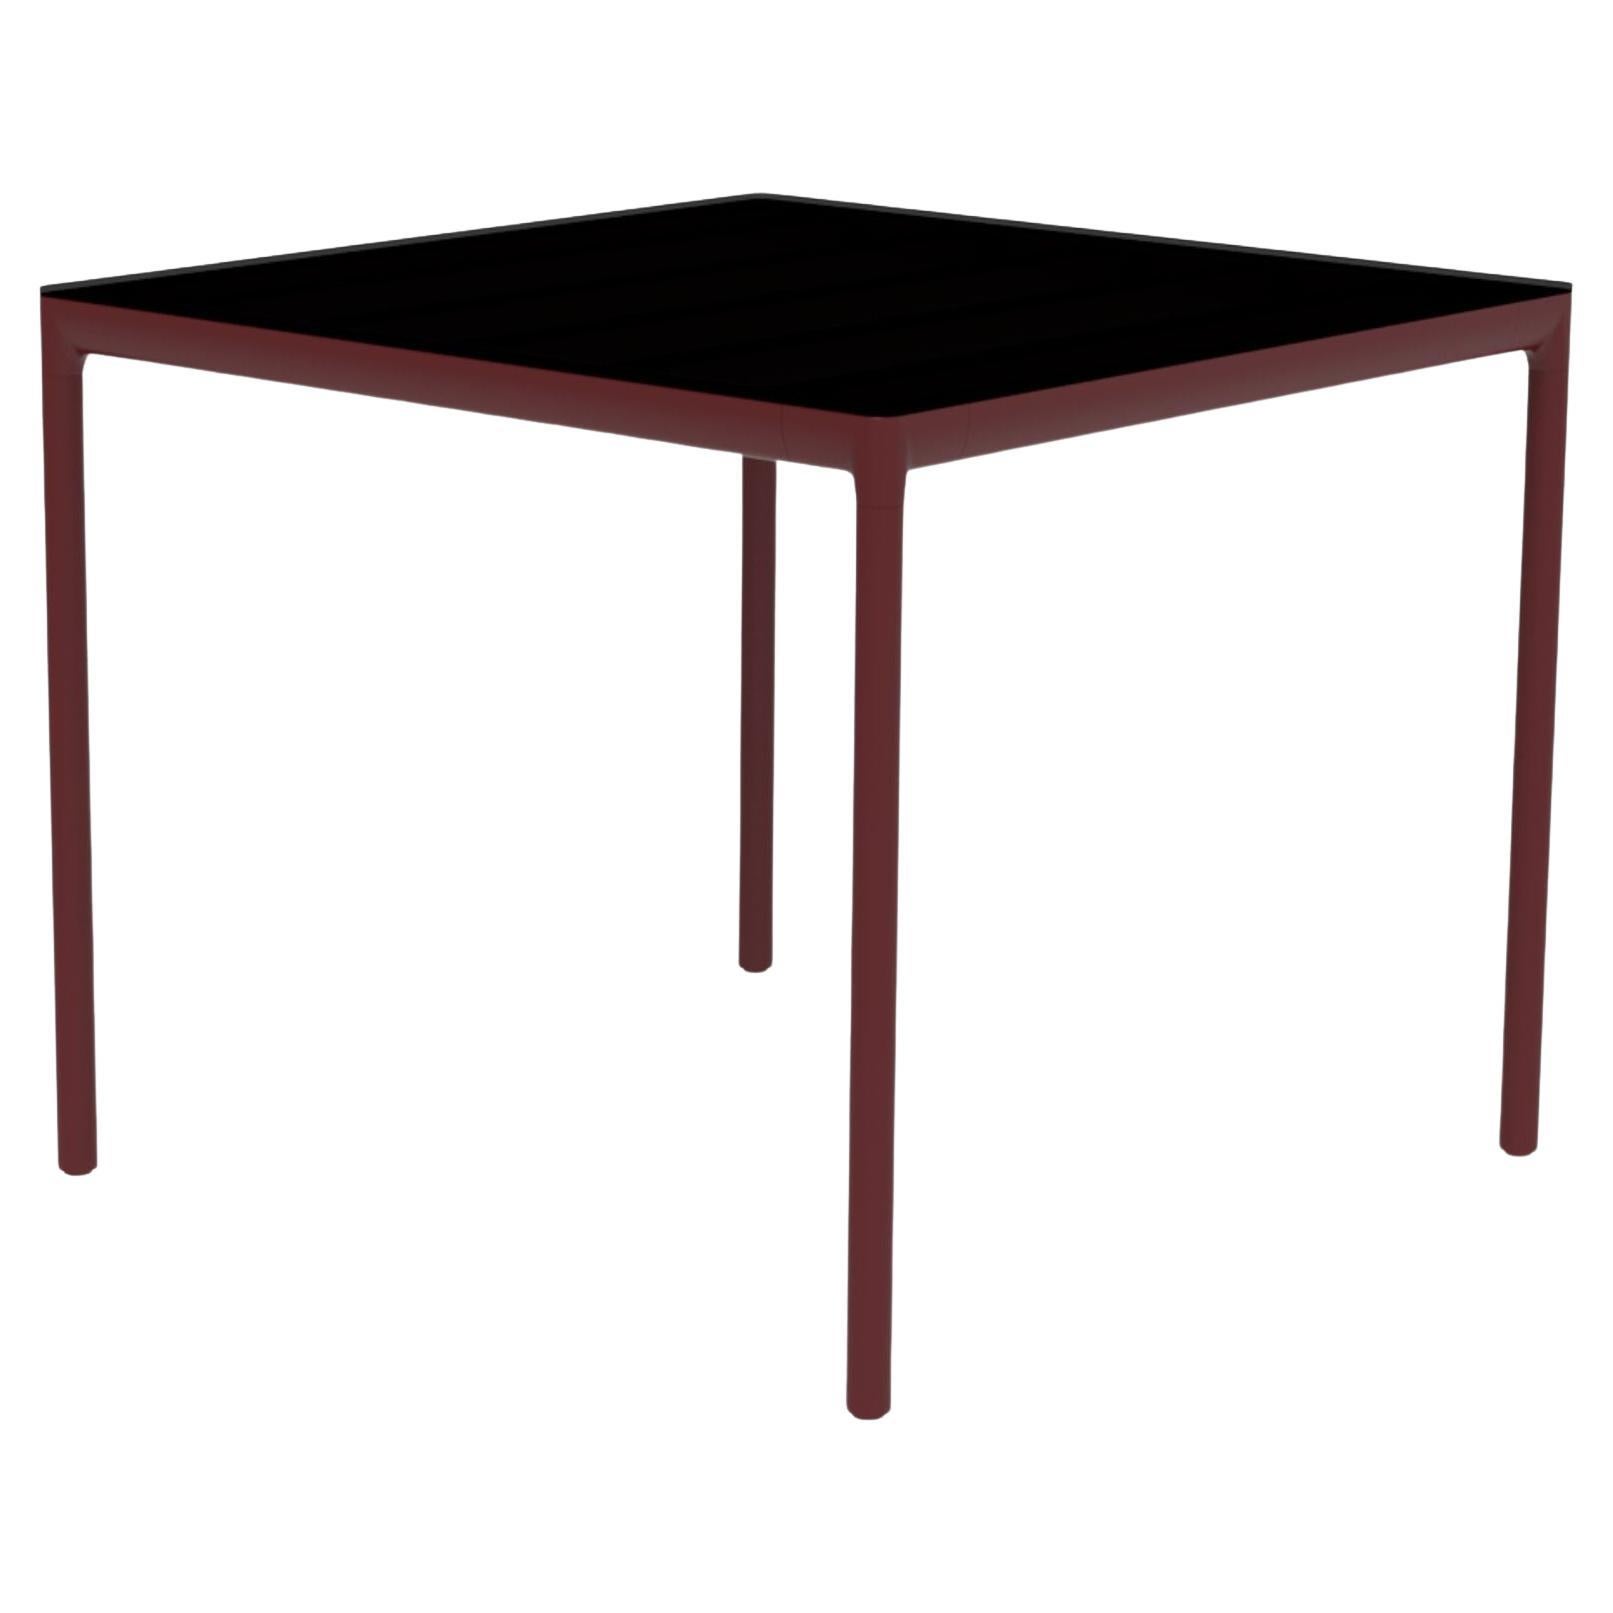 Ribbons Burgundy 90 Table by Mowee For Sale